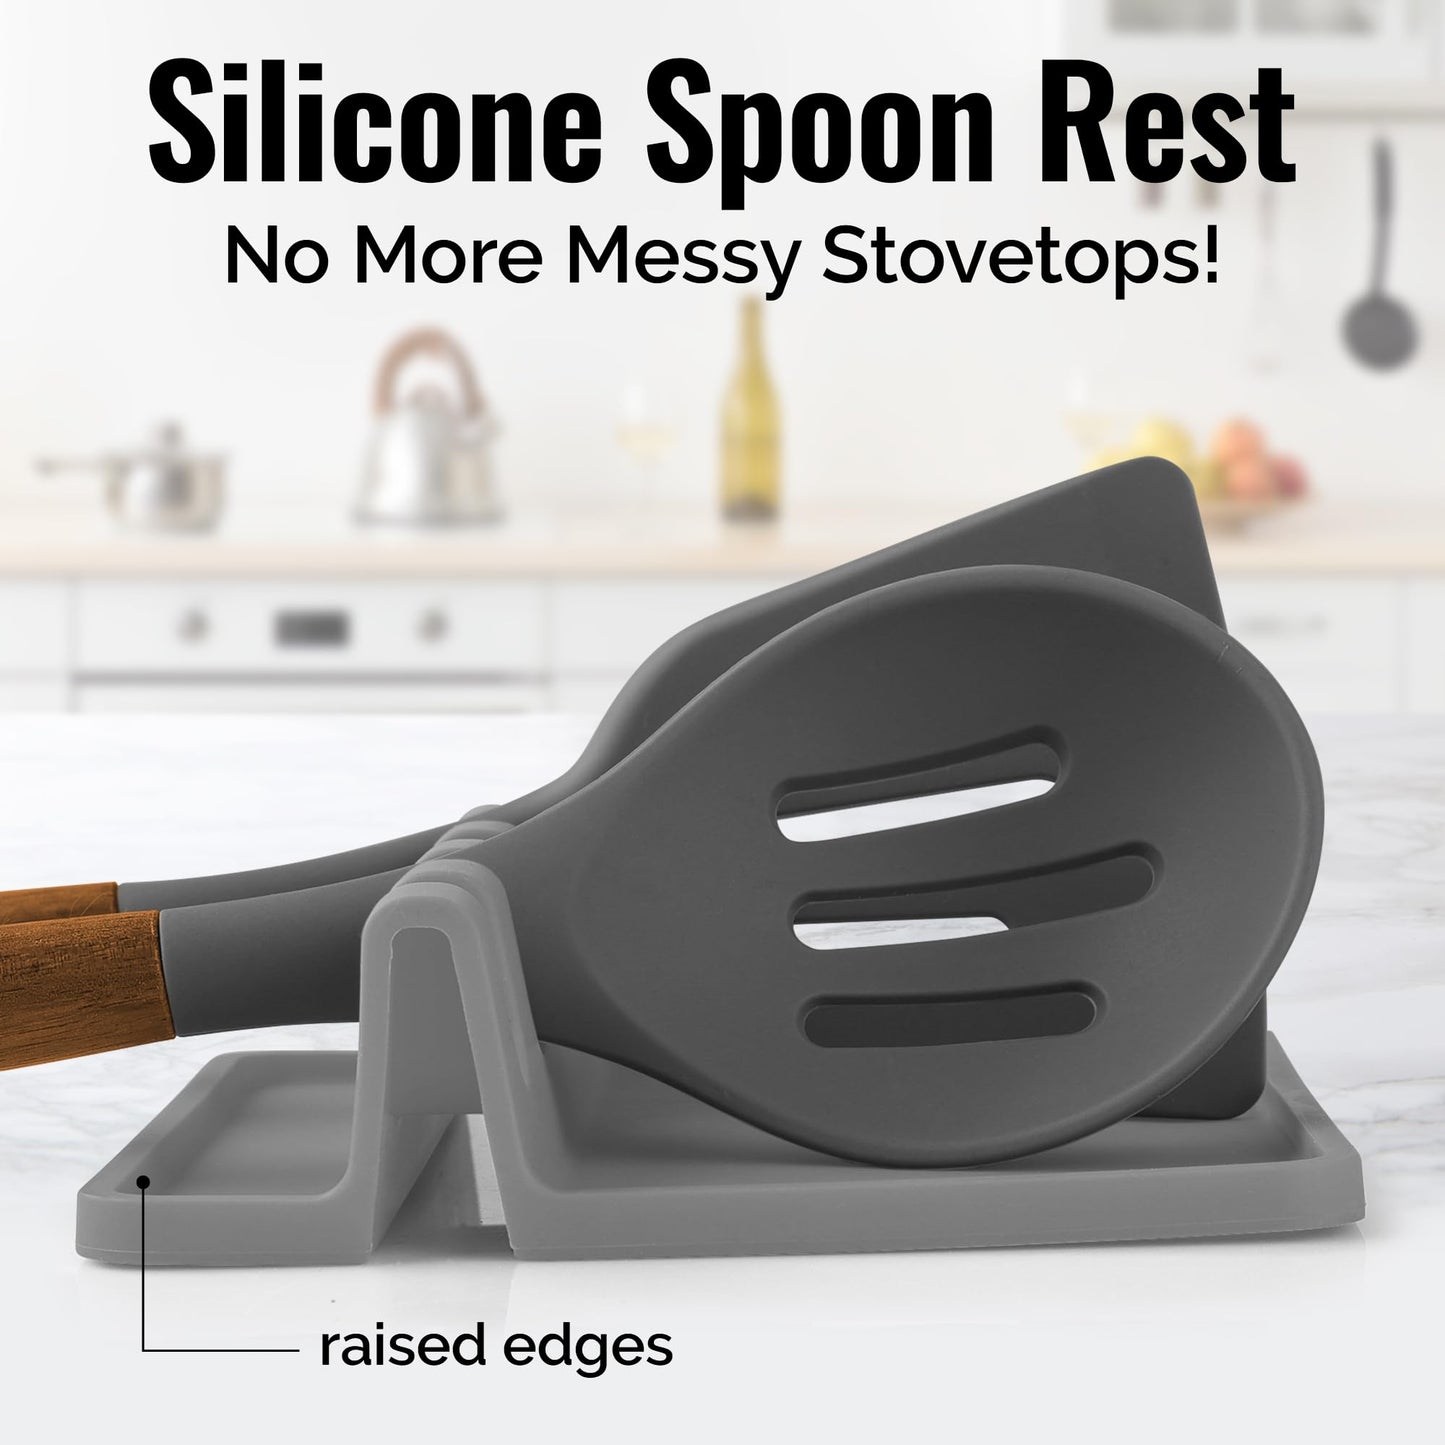 Zulay Kitchen Silicone Utensil Rest - BPA-Free, Durable Spoon Rest with Drip Pad - Heat-Resistant Spoon Rest for Stove Top - Spoon Rest for Kitchen Counter - Kitchen Gadgets & Kitchen Utensils Holder